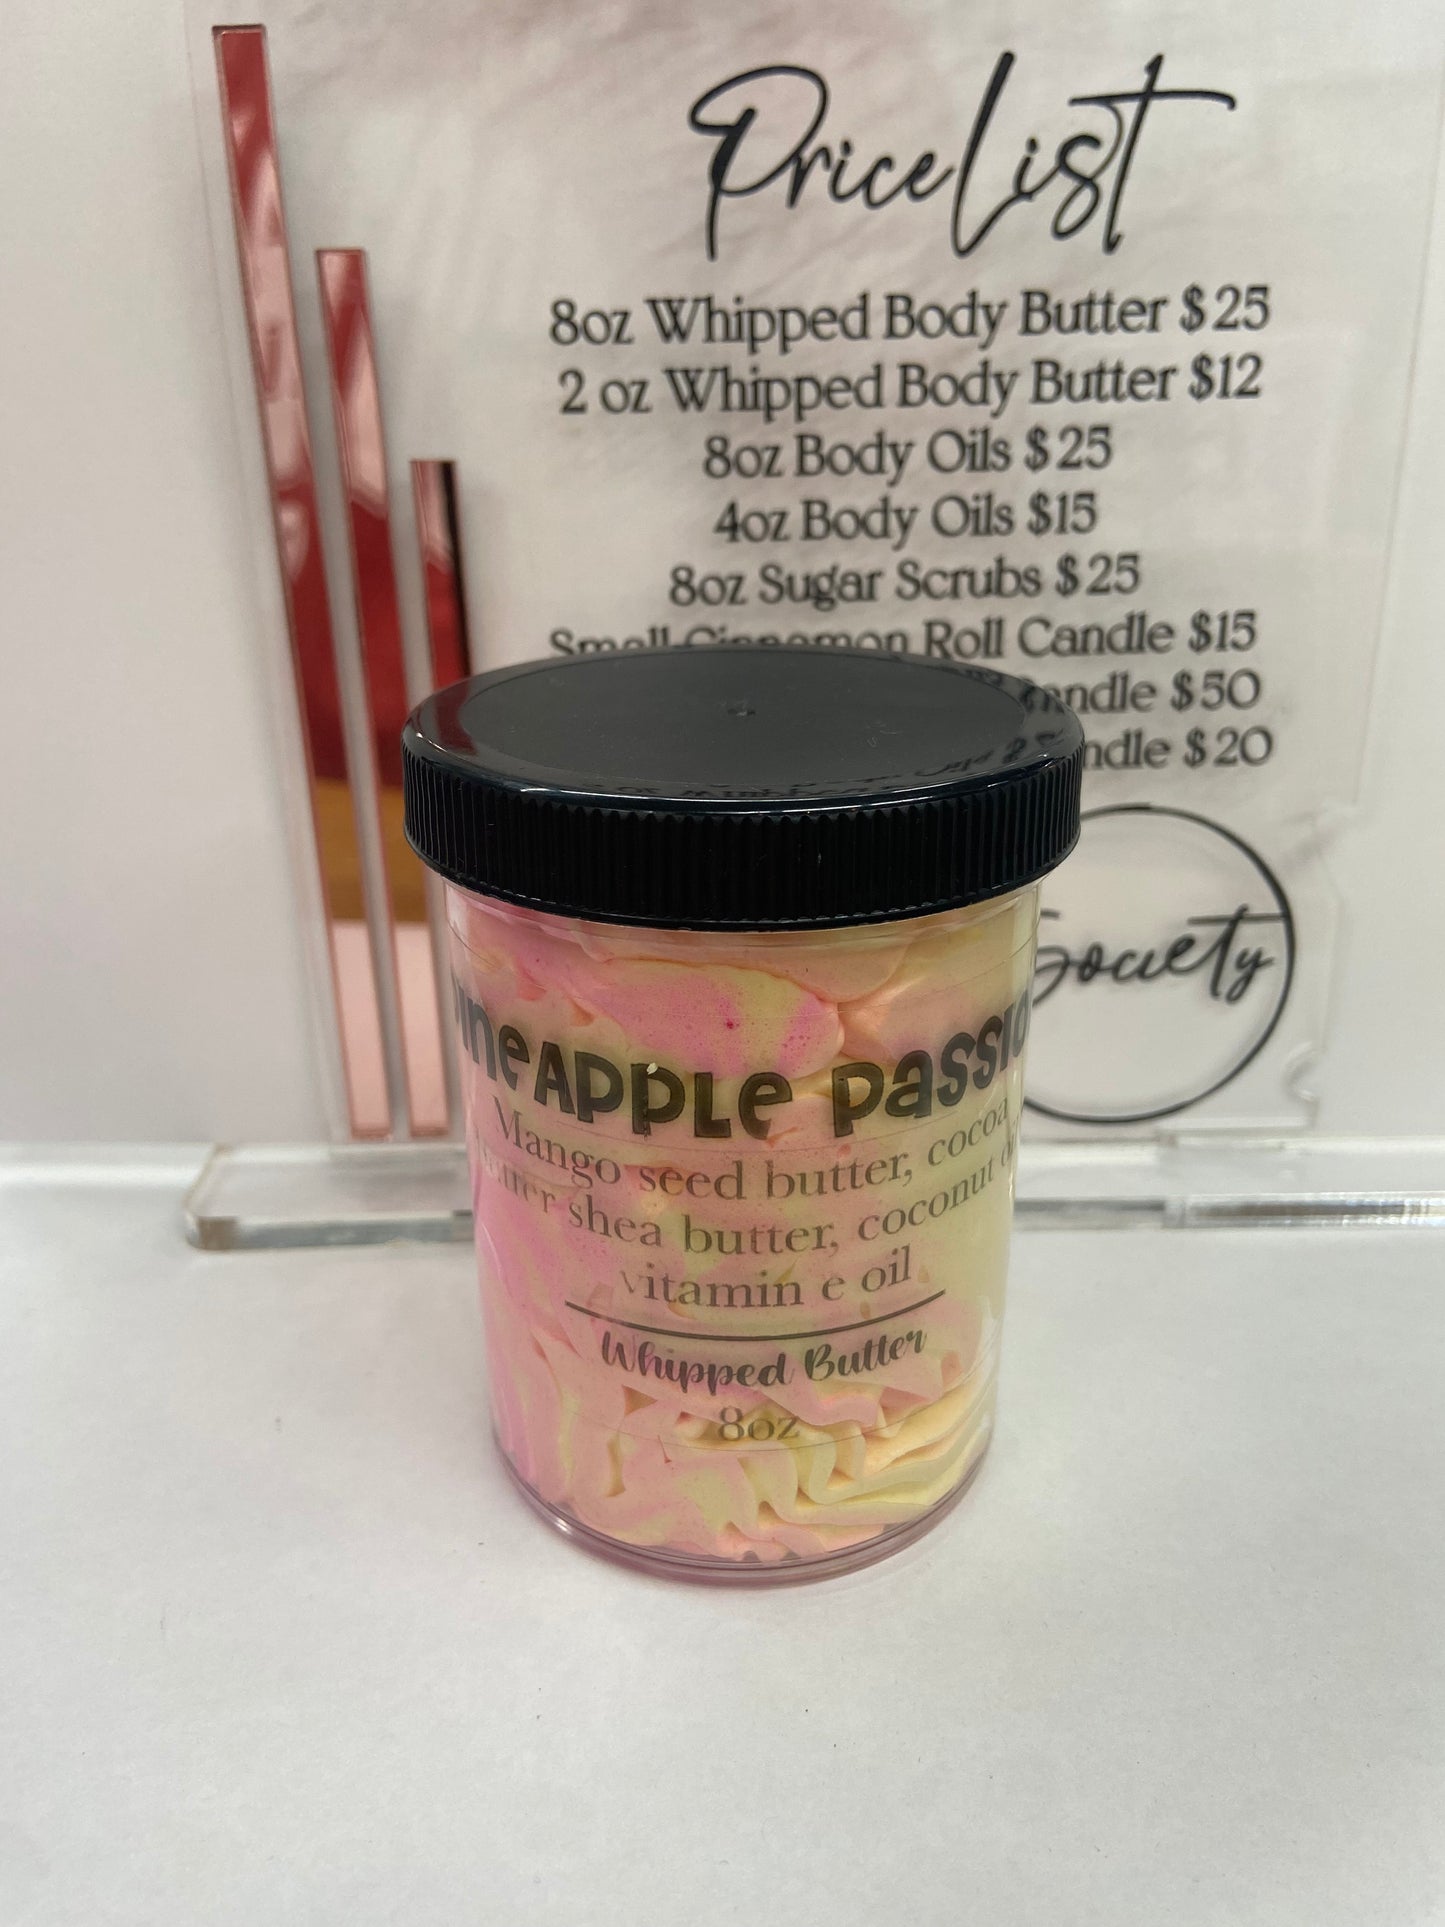 “Pineapple Passion” Whipped Body Butter